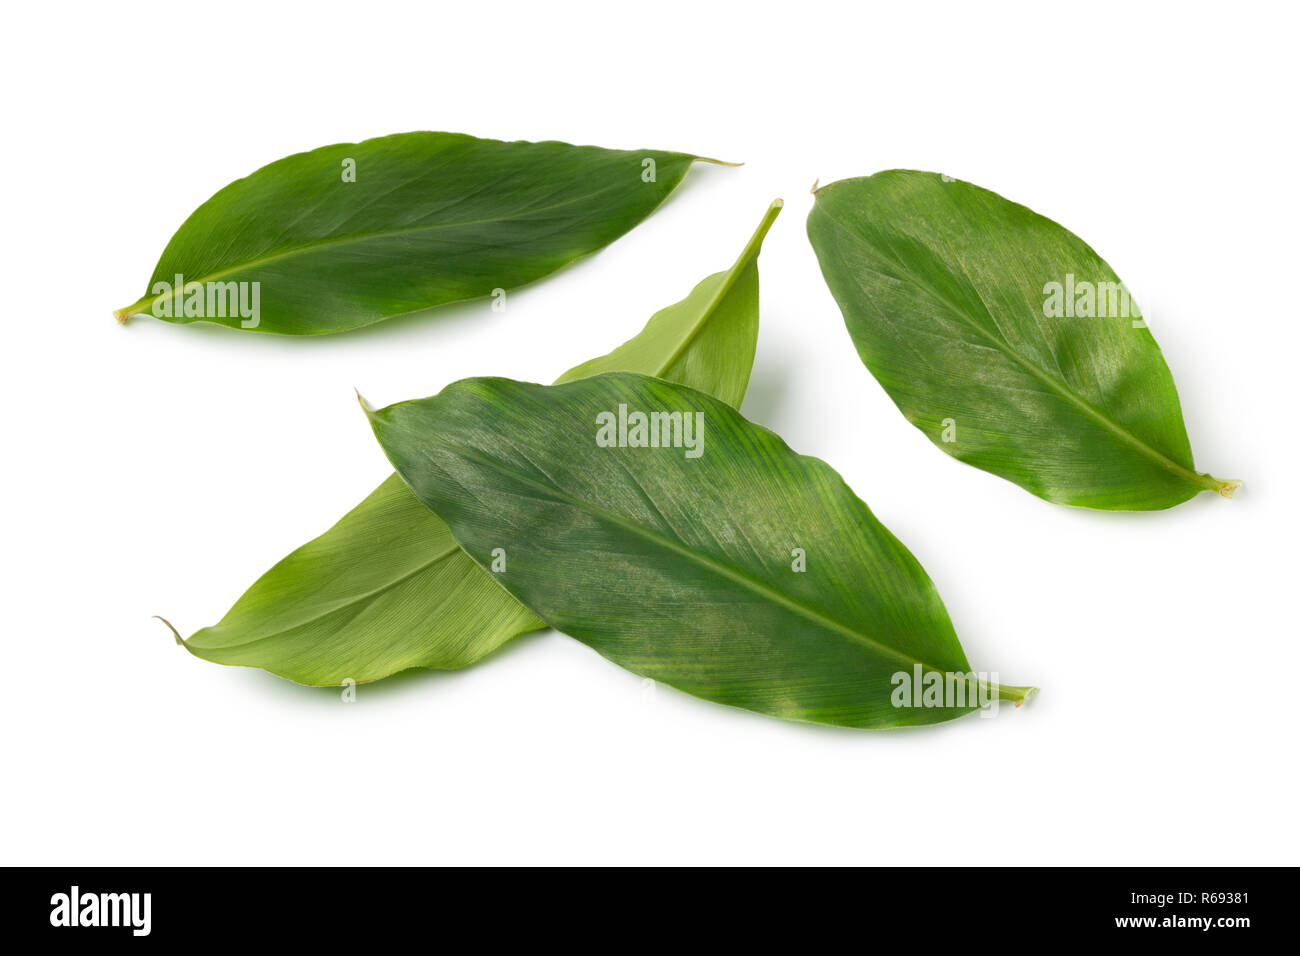 Green cardamom leaves isolated on white background Stock Photo